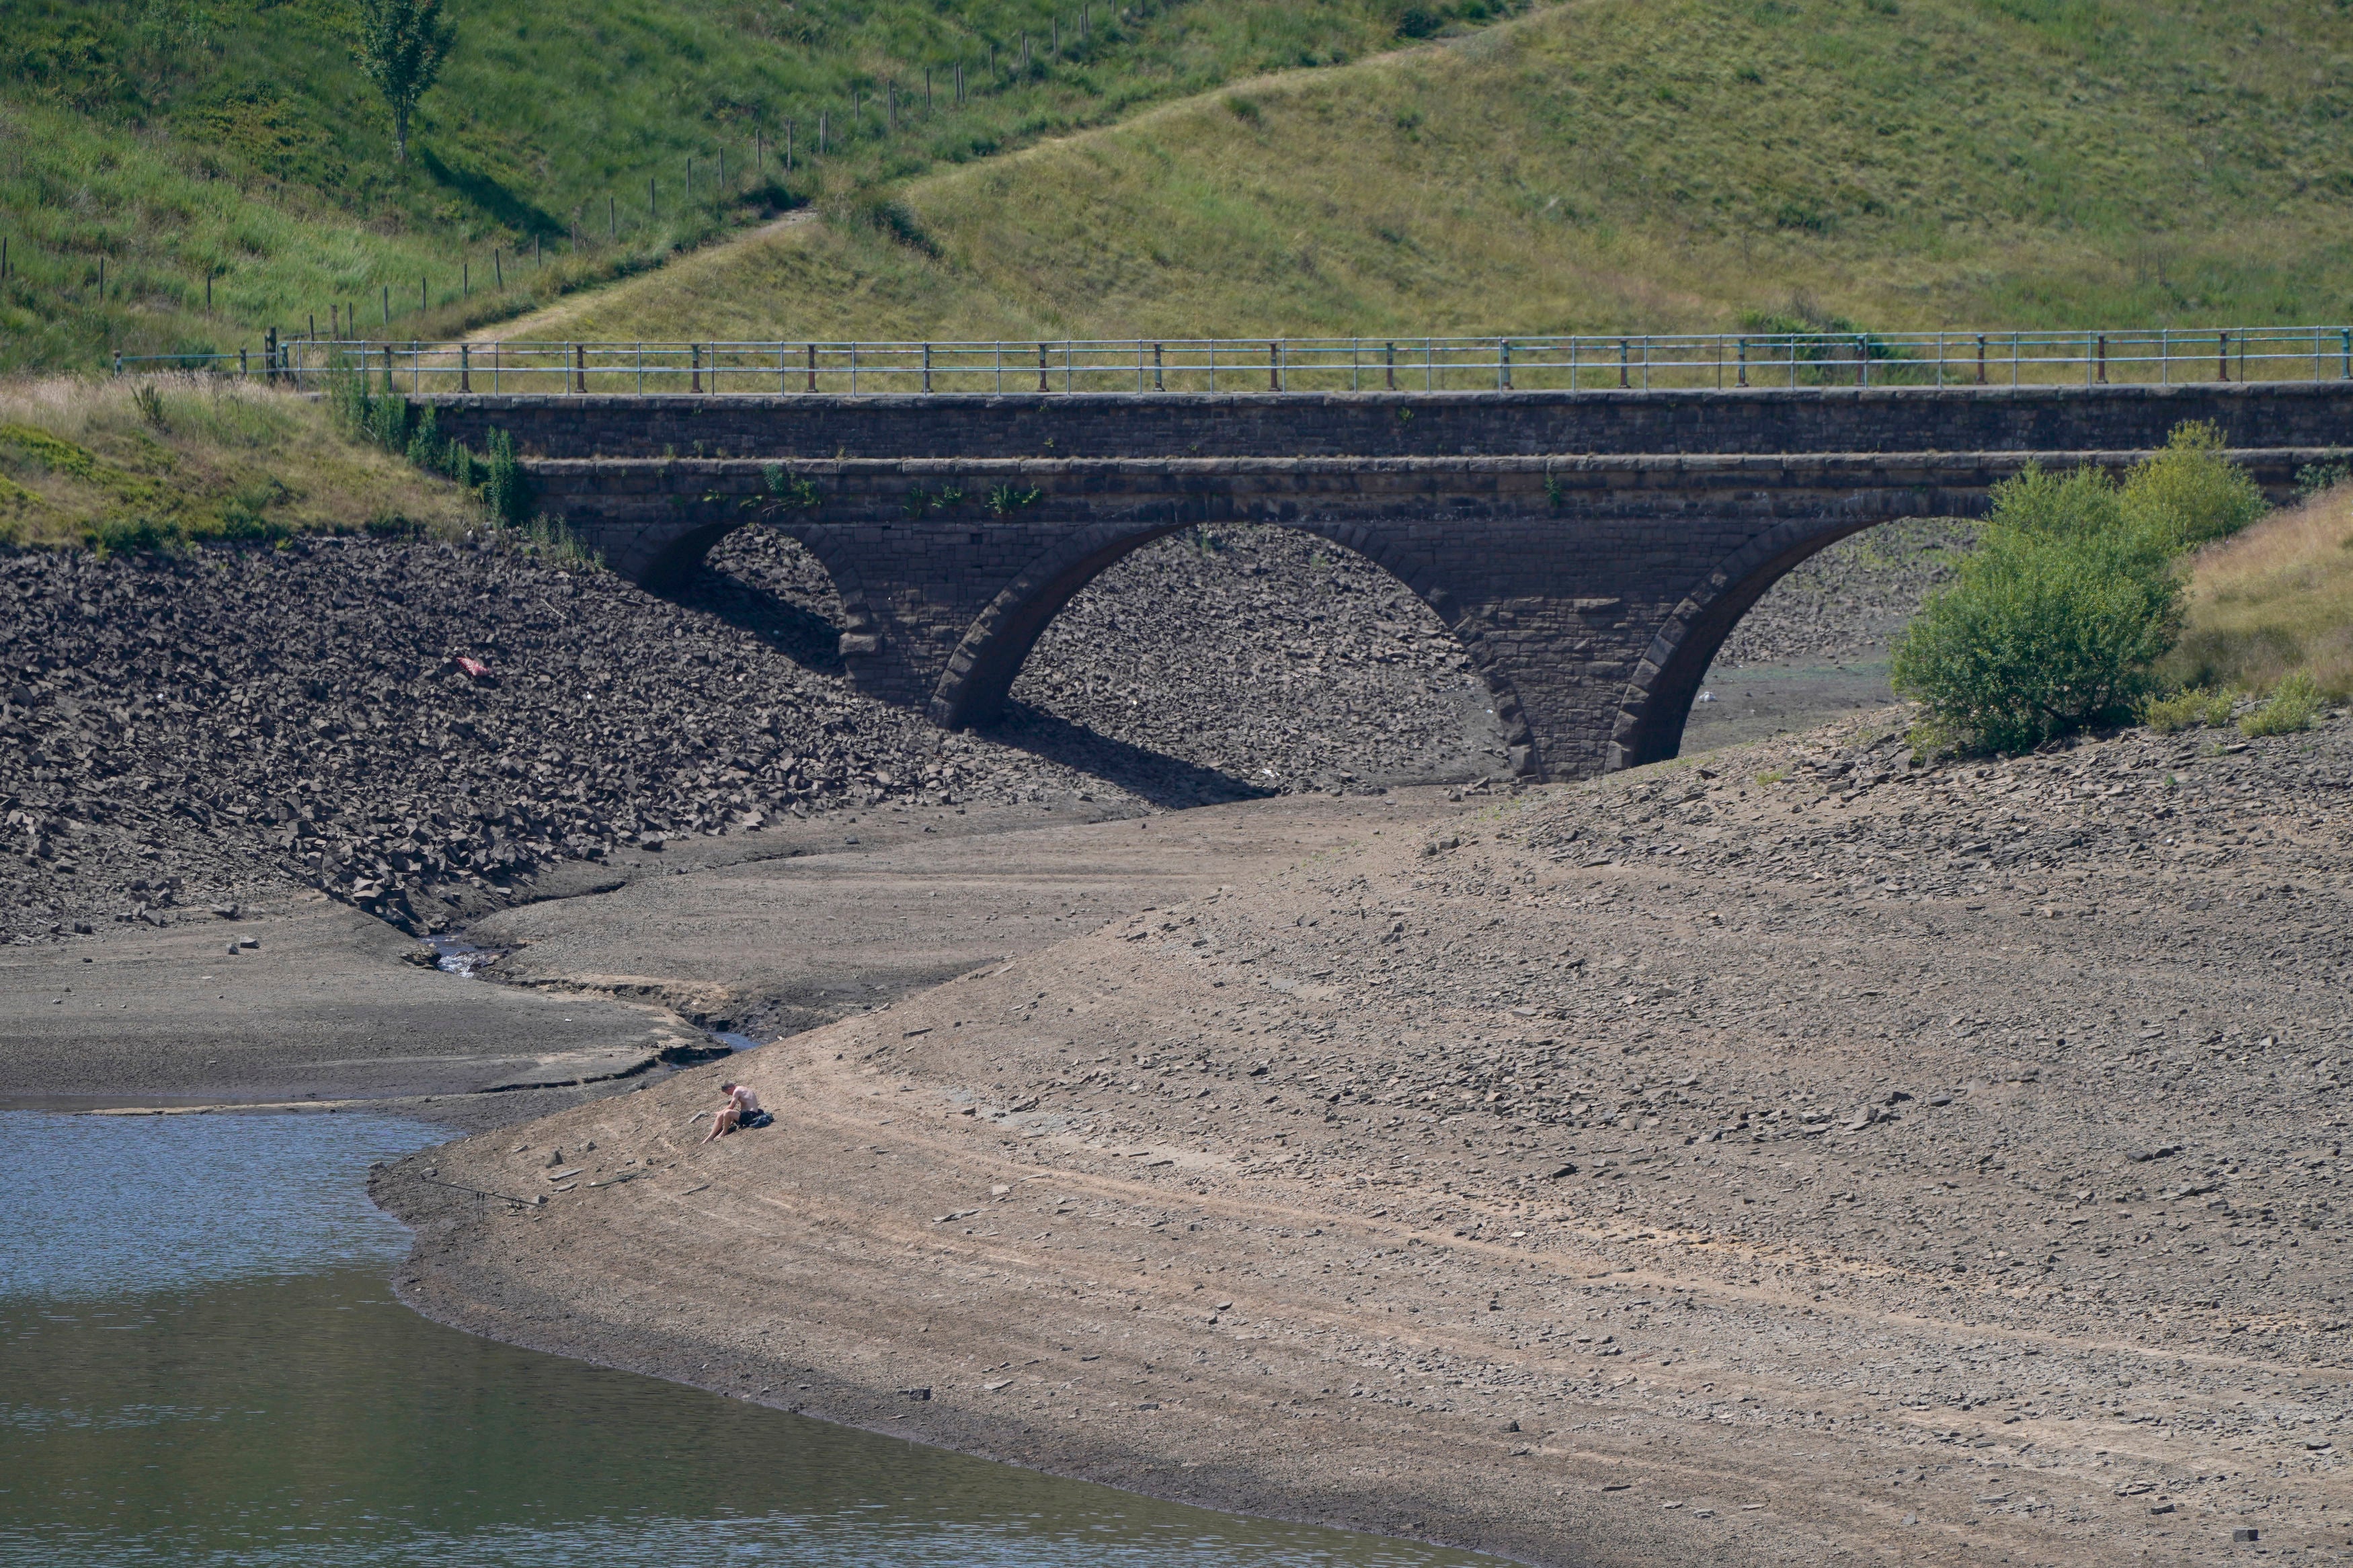 A near empty Dowry Reservoir close to Oldham.